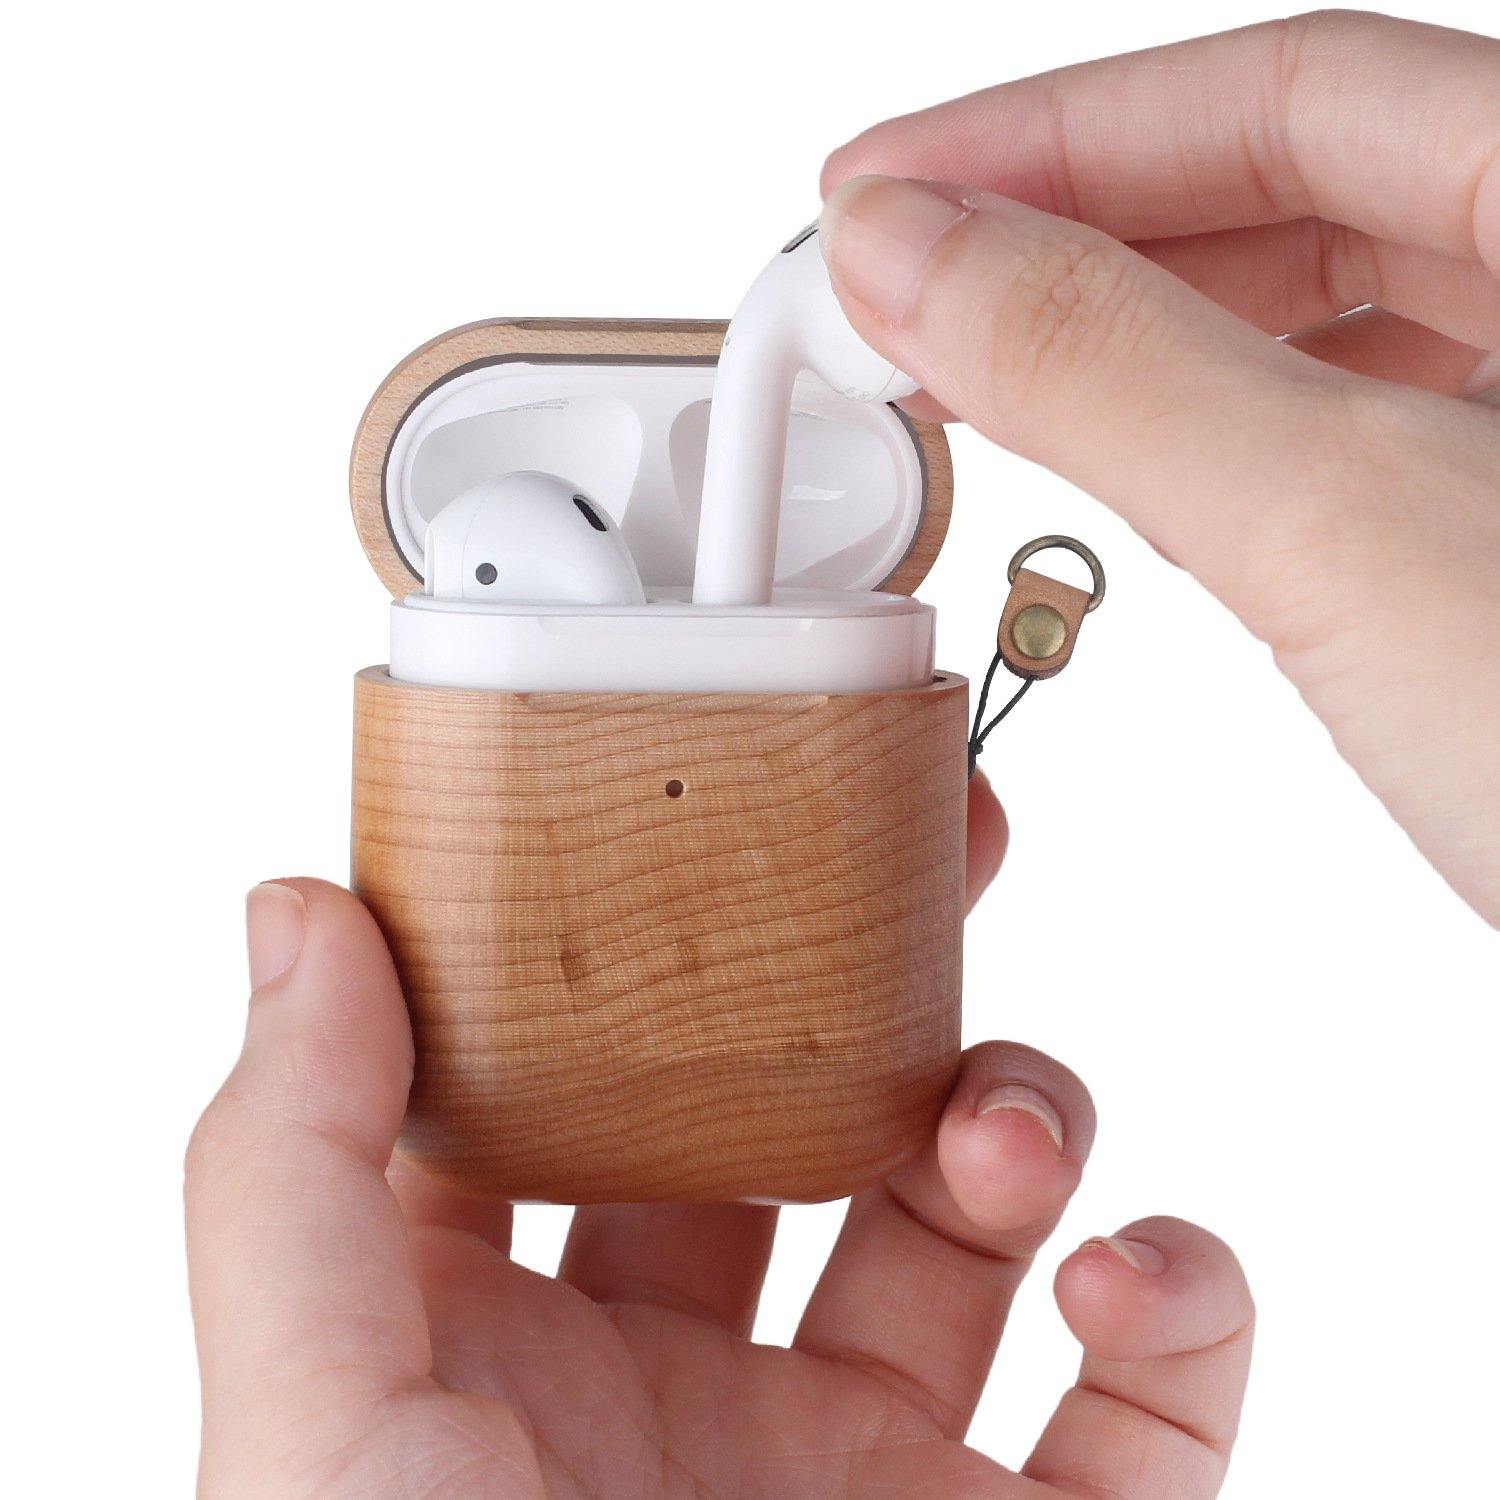 Maple Wooden AirPod Case 🌳 Natural Wood. ♻️ Eco-friendly. ✈️ Free Worldwide Shipping. 🎁 Perfect Gift.